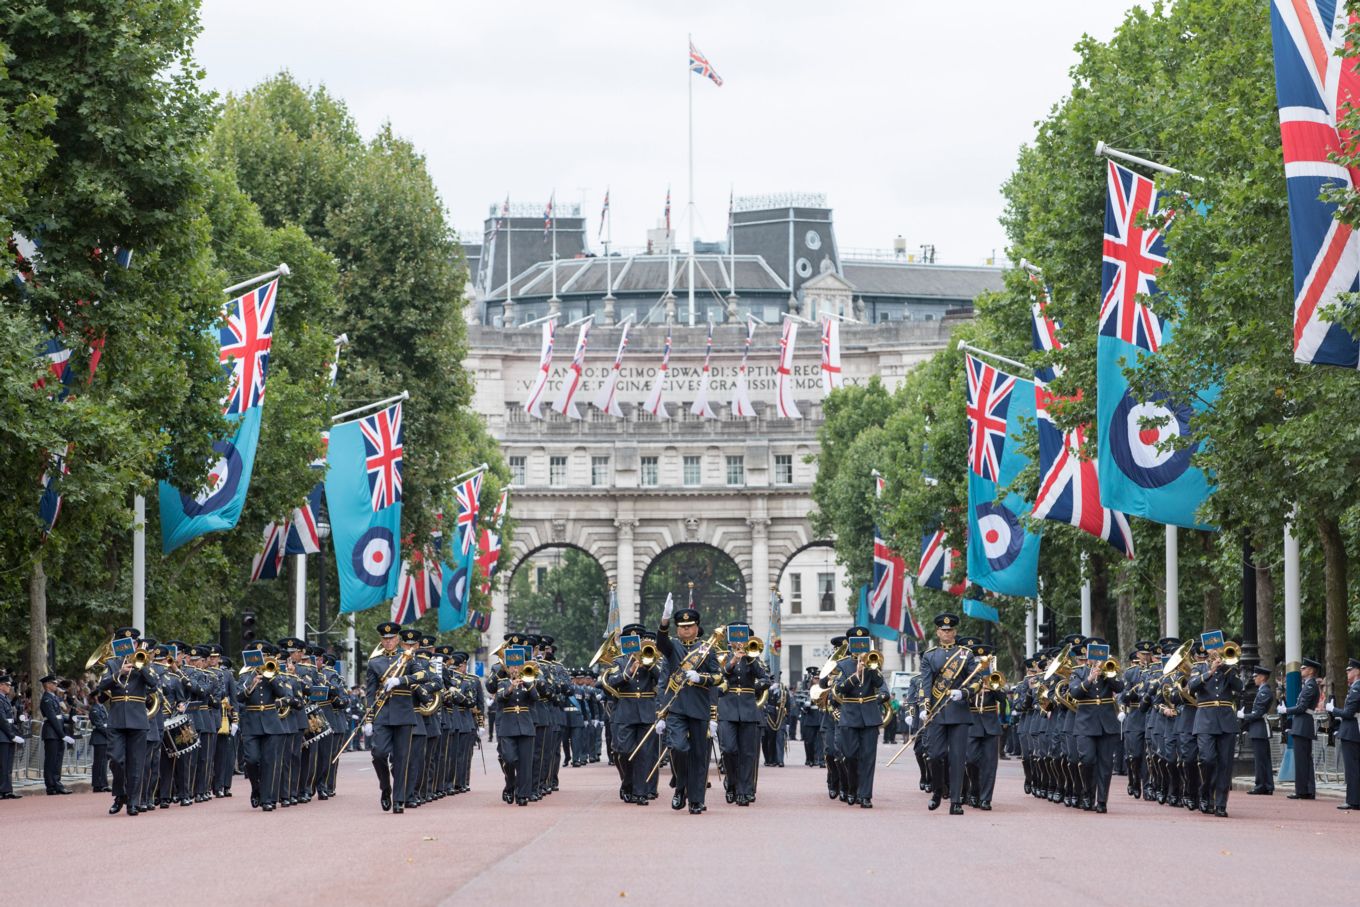 Royal Air Force Bands march down The Mall.